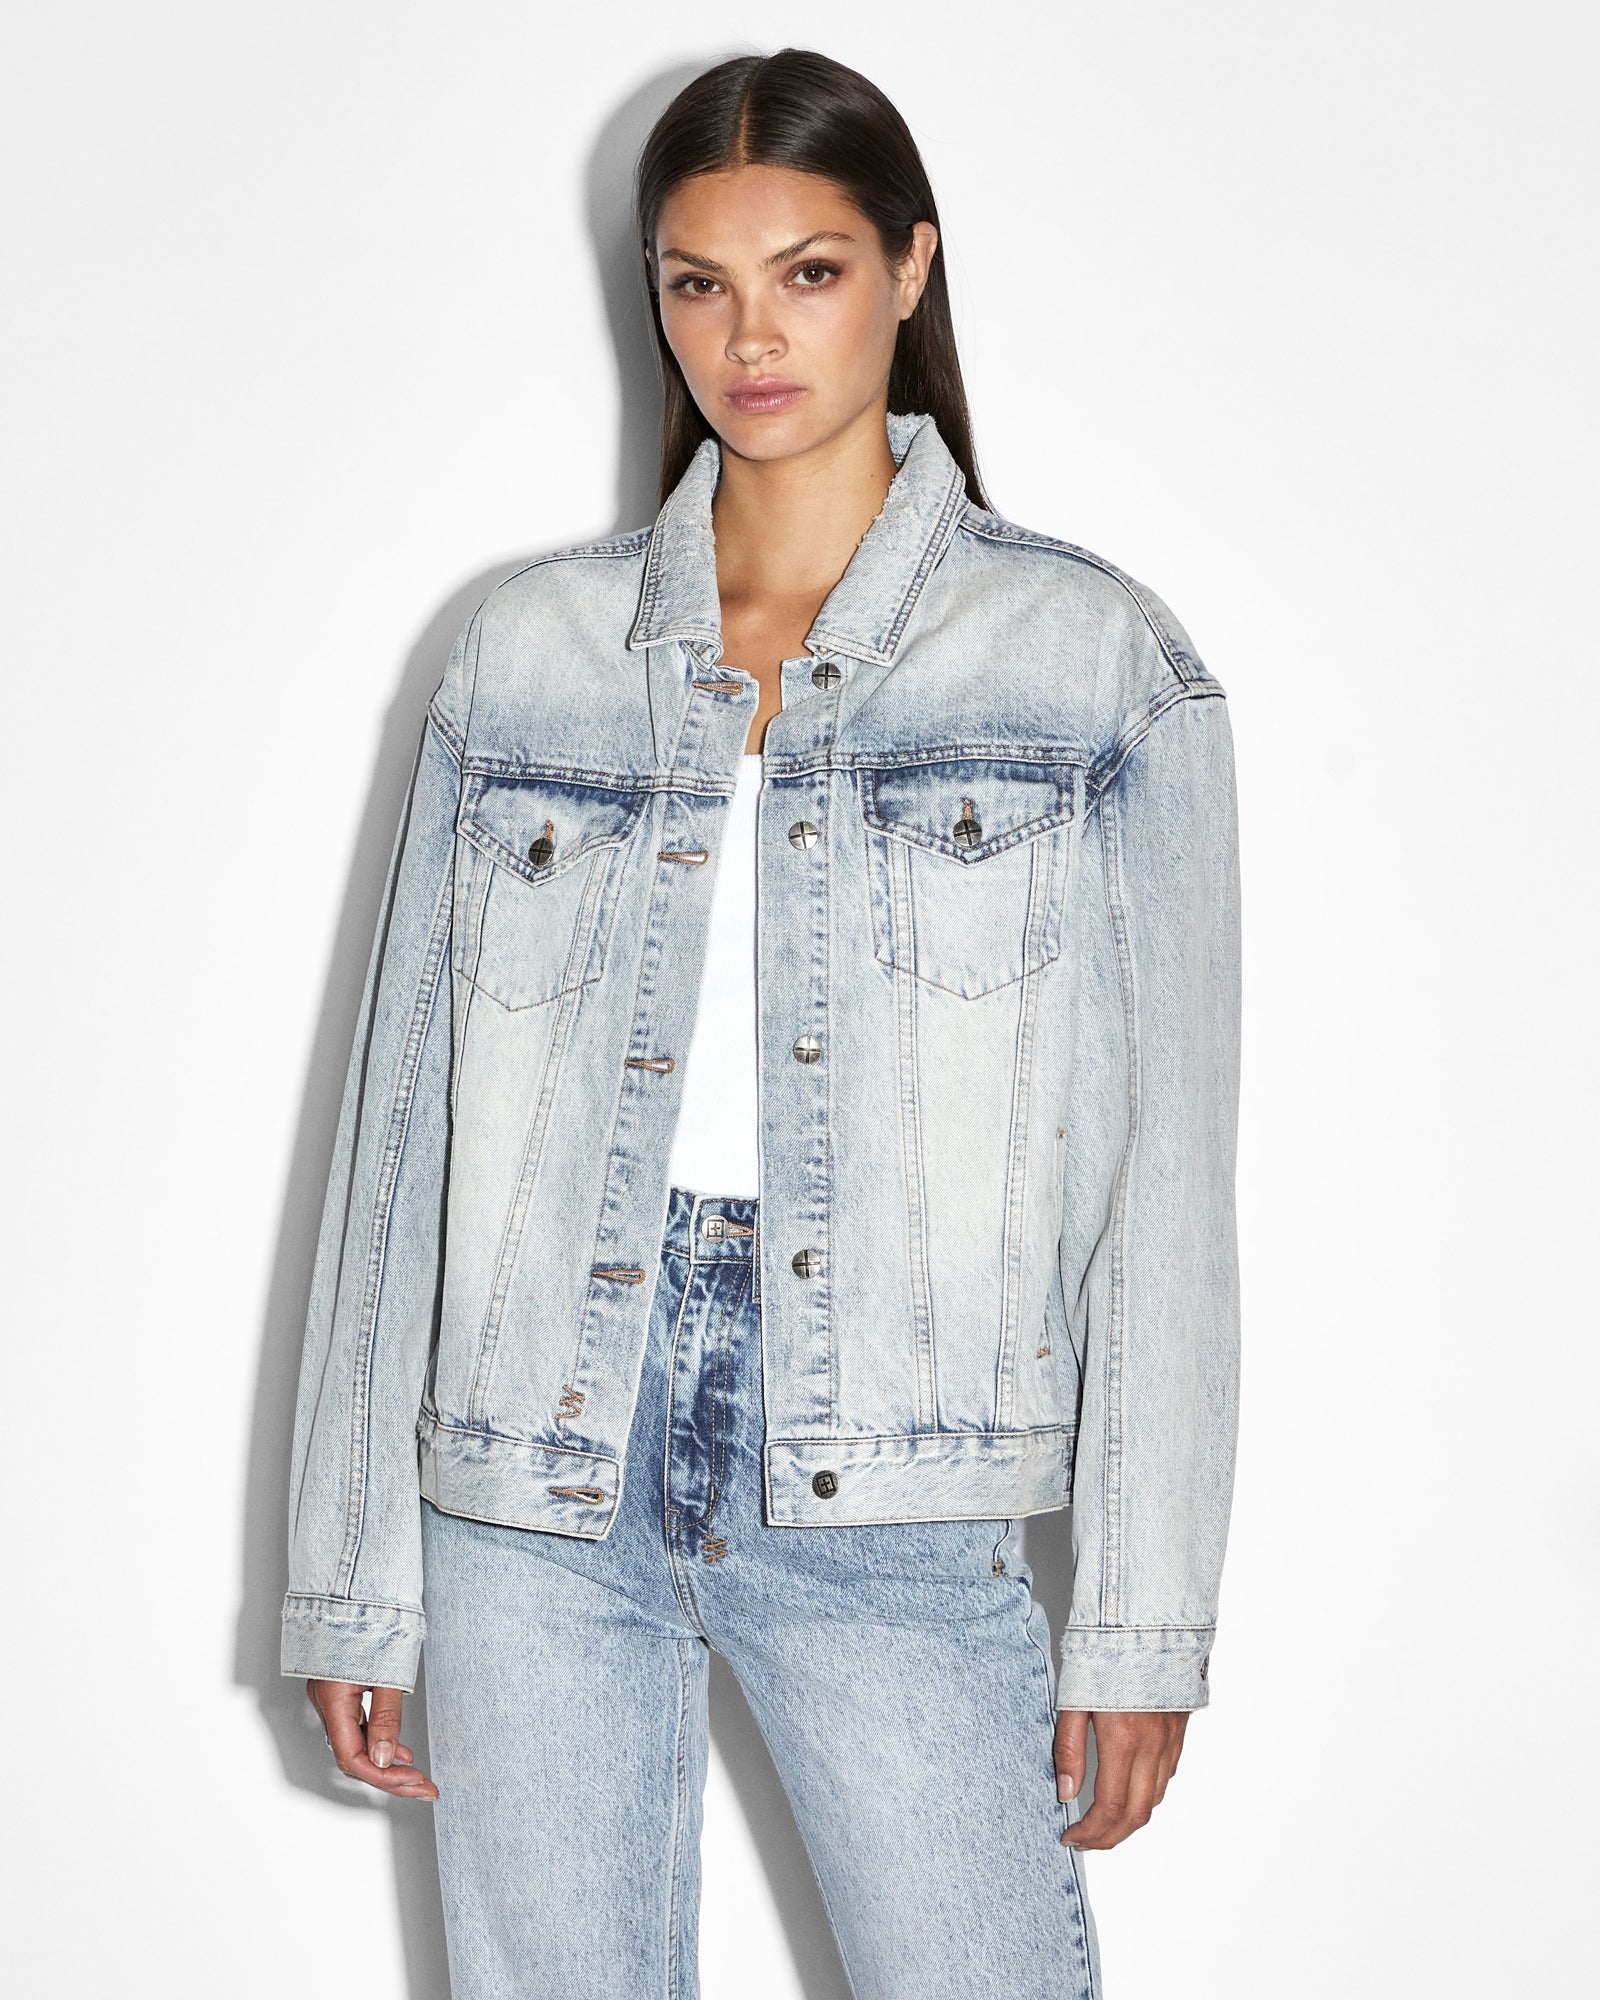 70+ Stylish Outfits With A Jean Jacket x Every Season | Blue jean jacket  outfits, Jacket outfit women, Denim jacket outfit